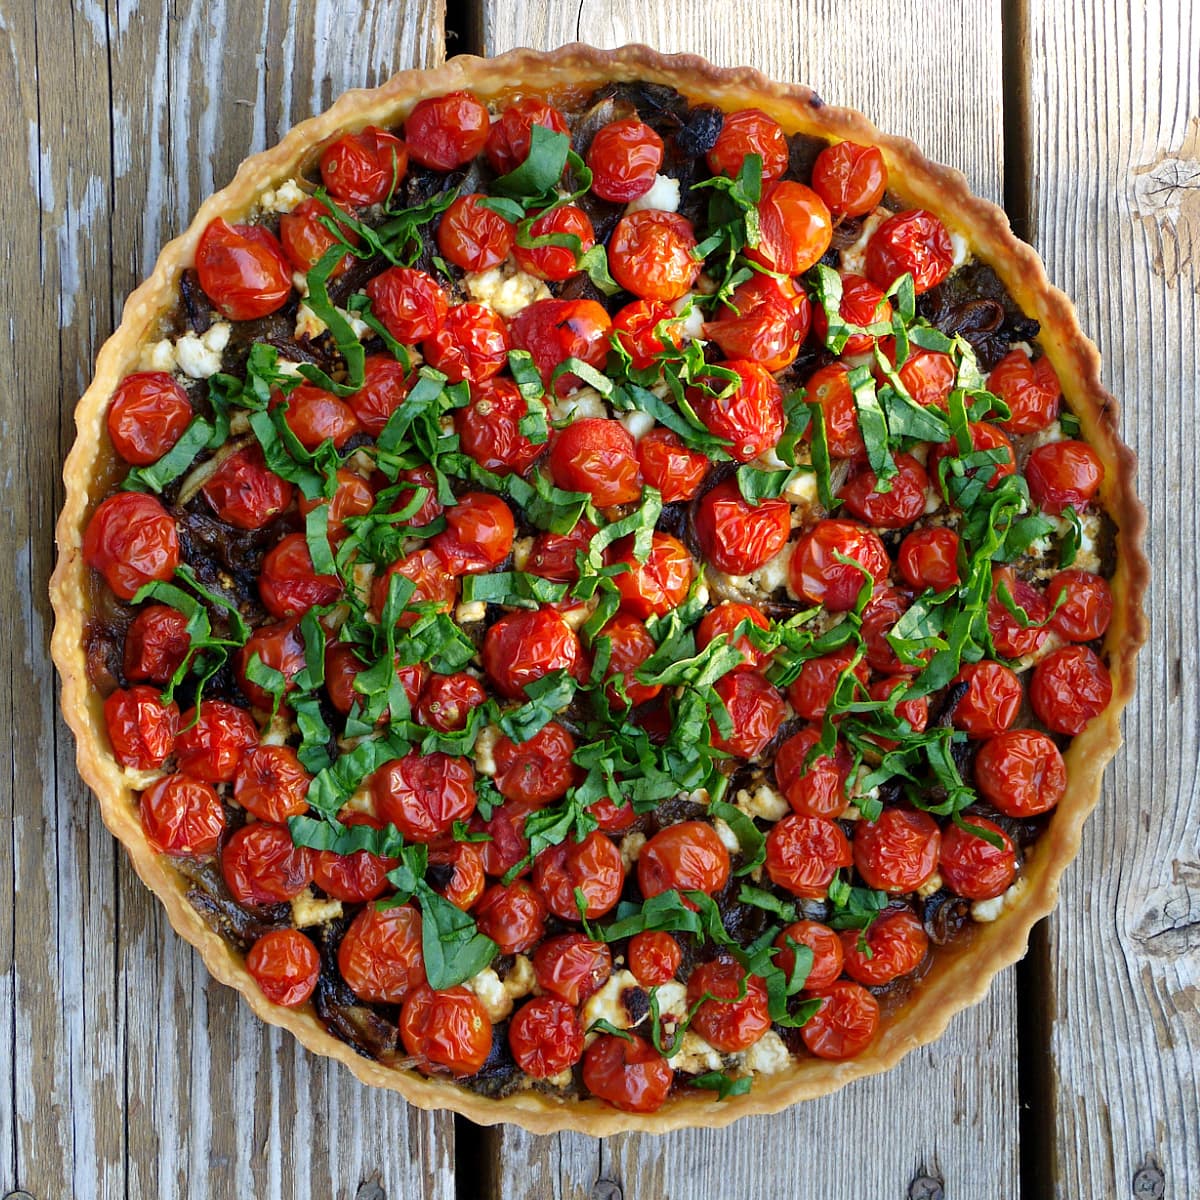 Overhead shot of fresh cherry tomato tart, baked and garnished with fresh spinach ribbons.